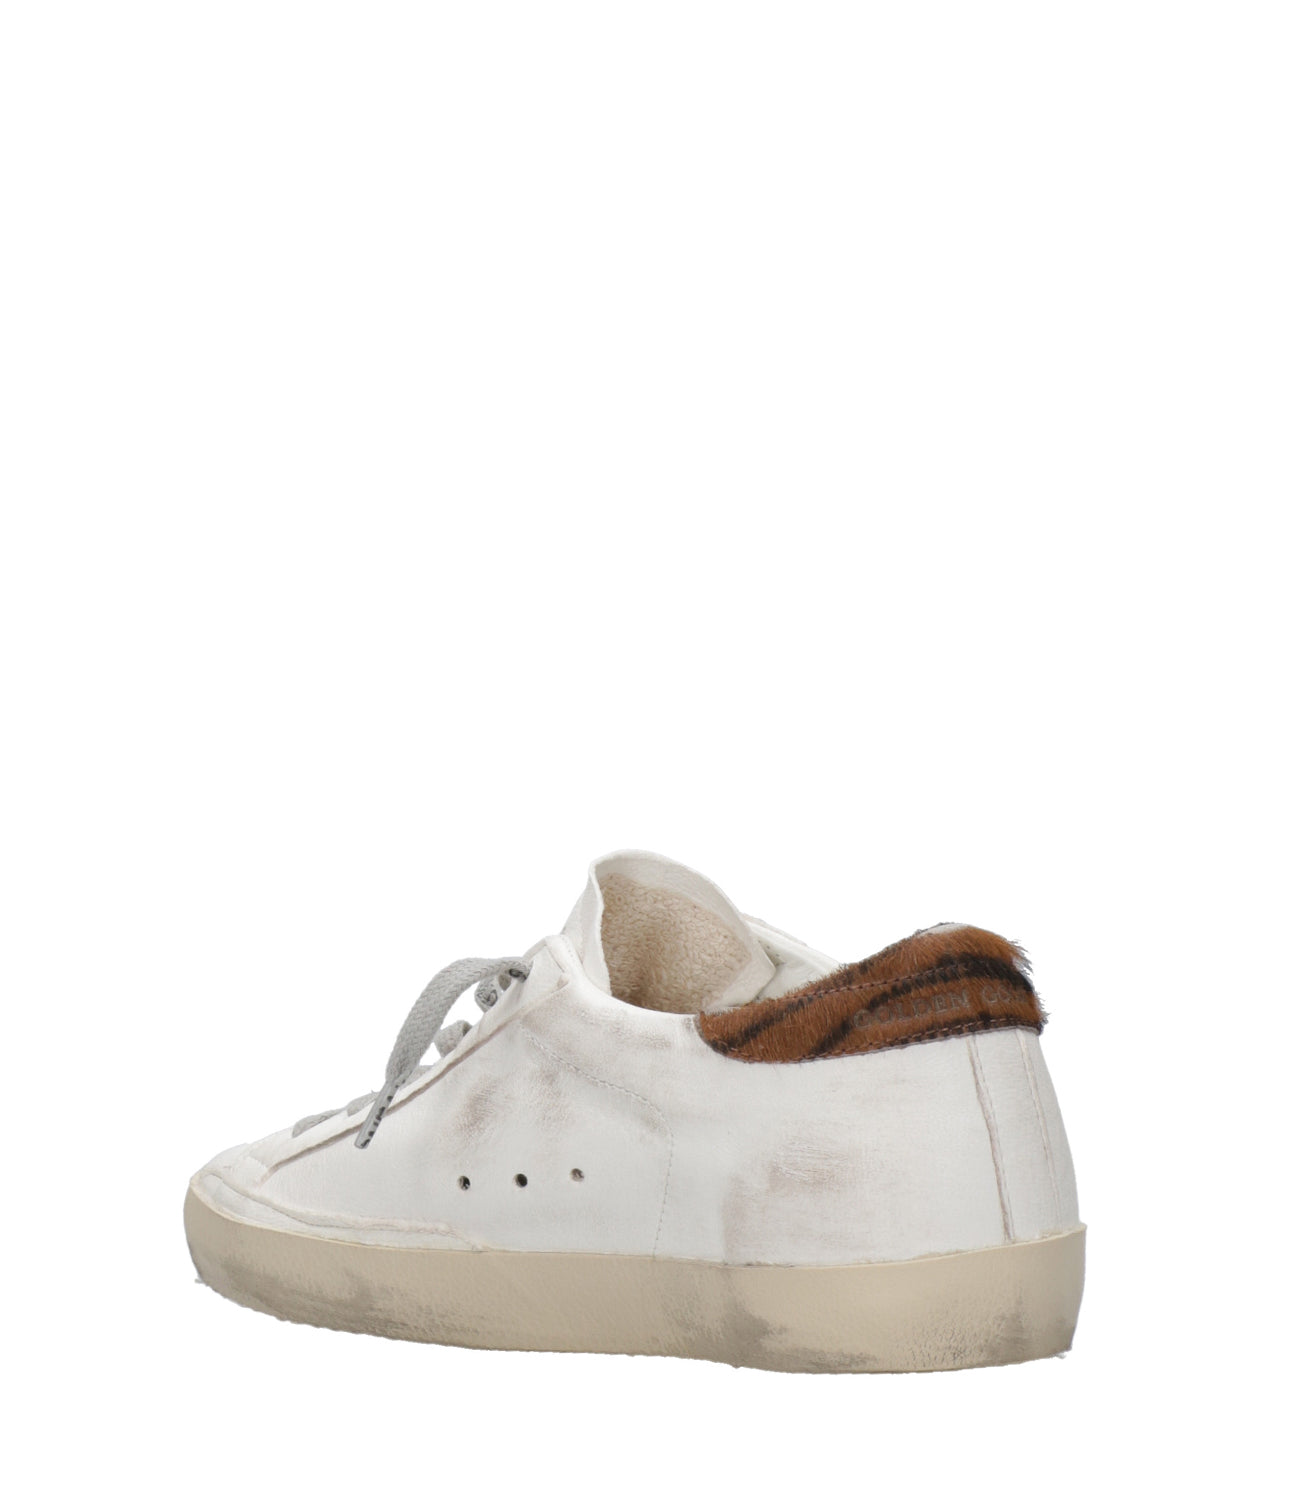 Golden Goose | Sneakers Super-Star White and Fuxia